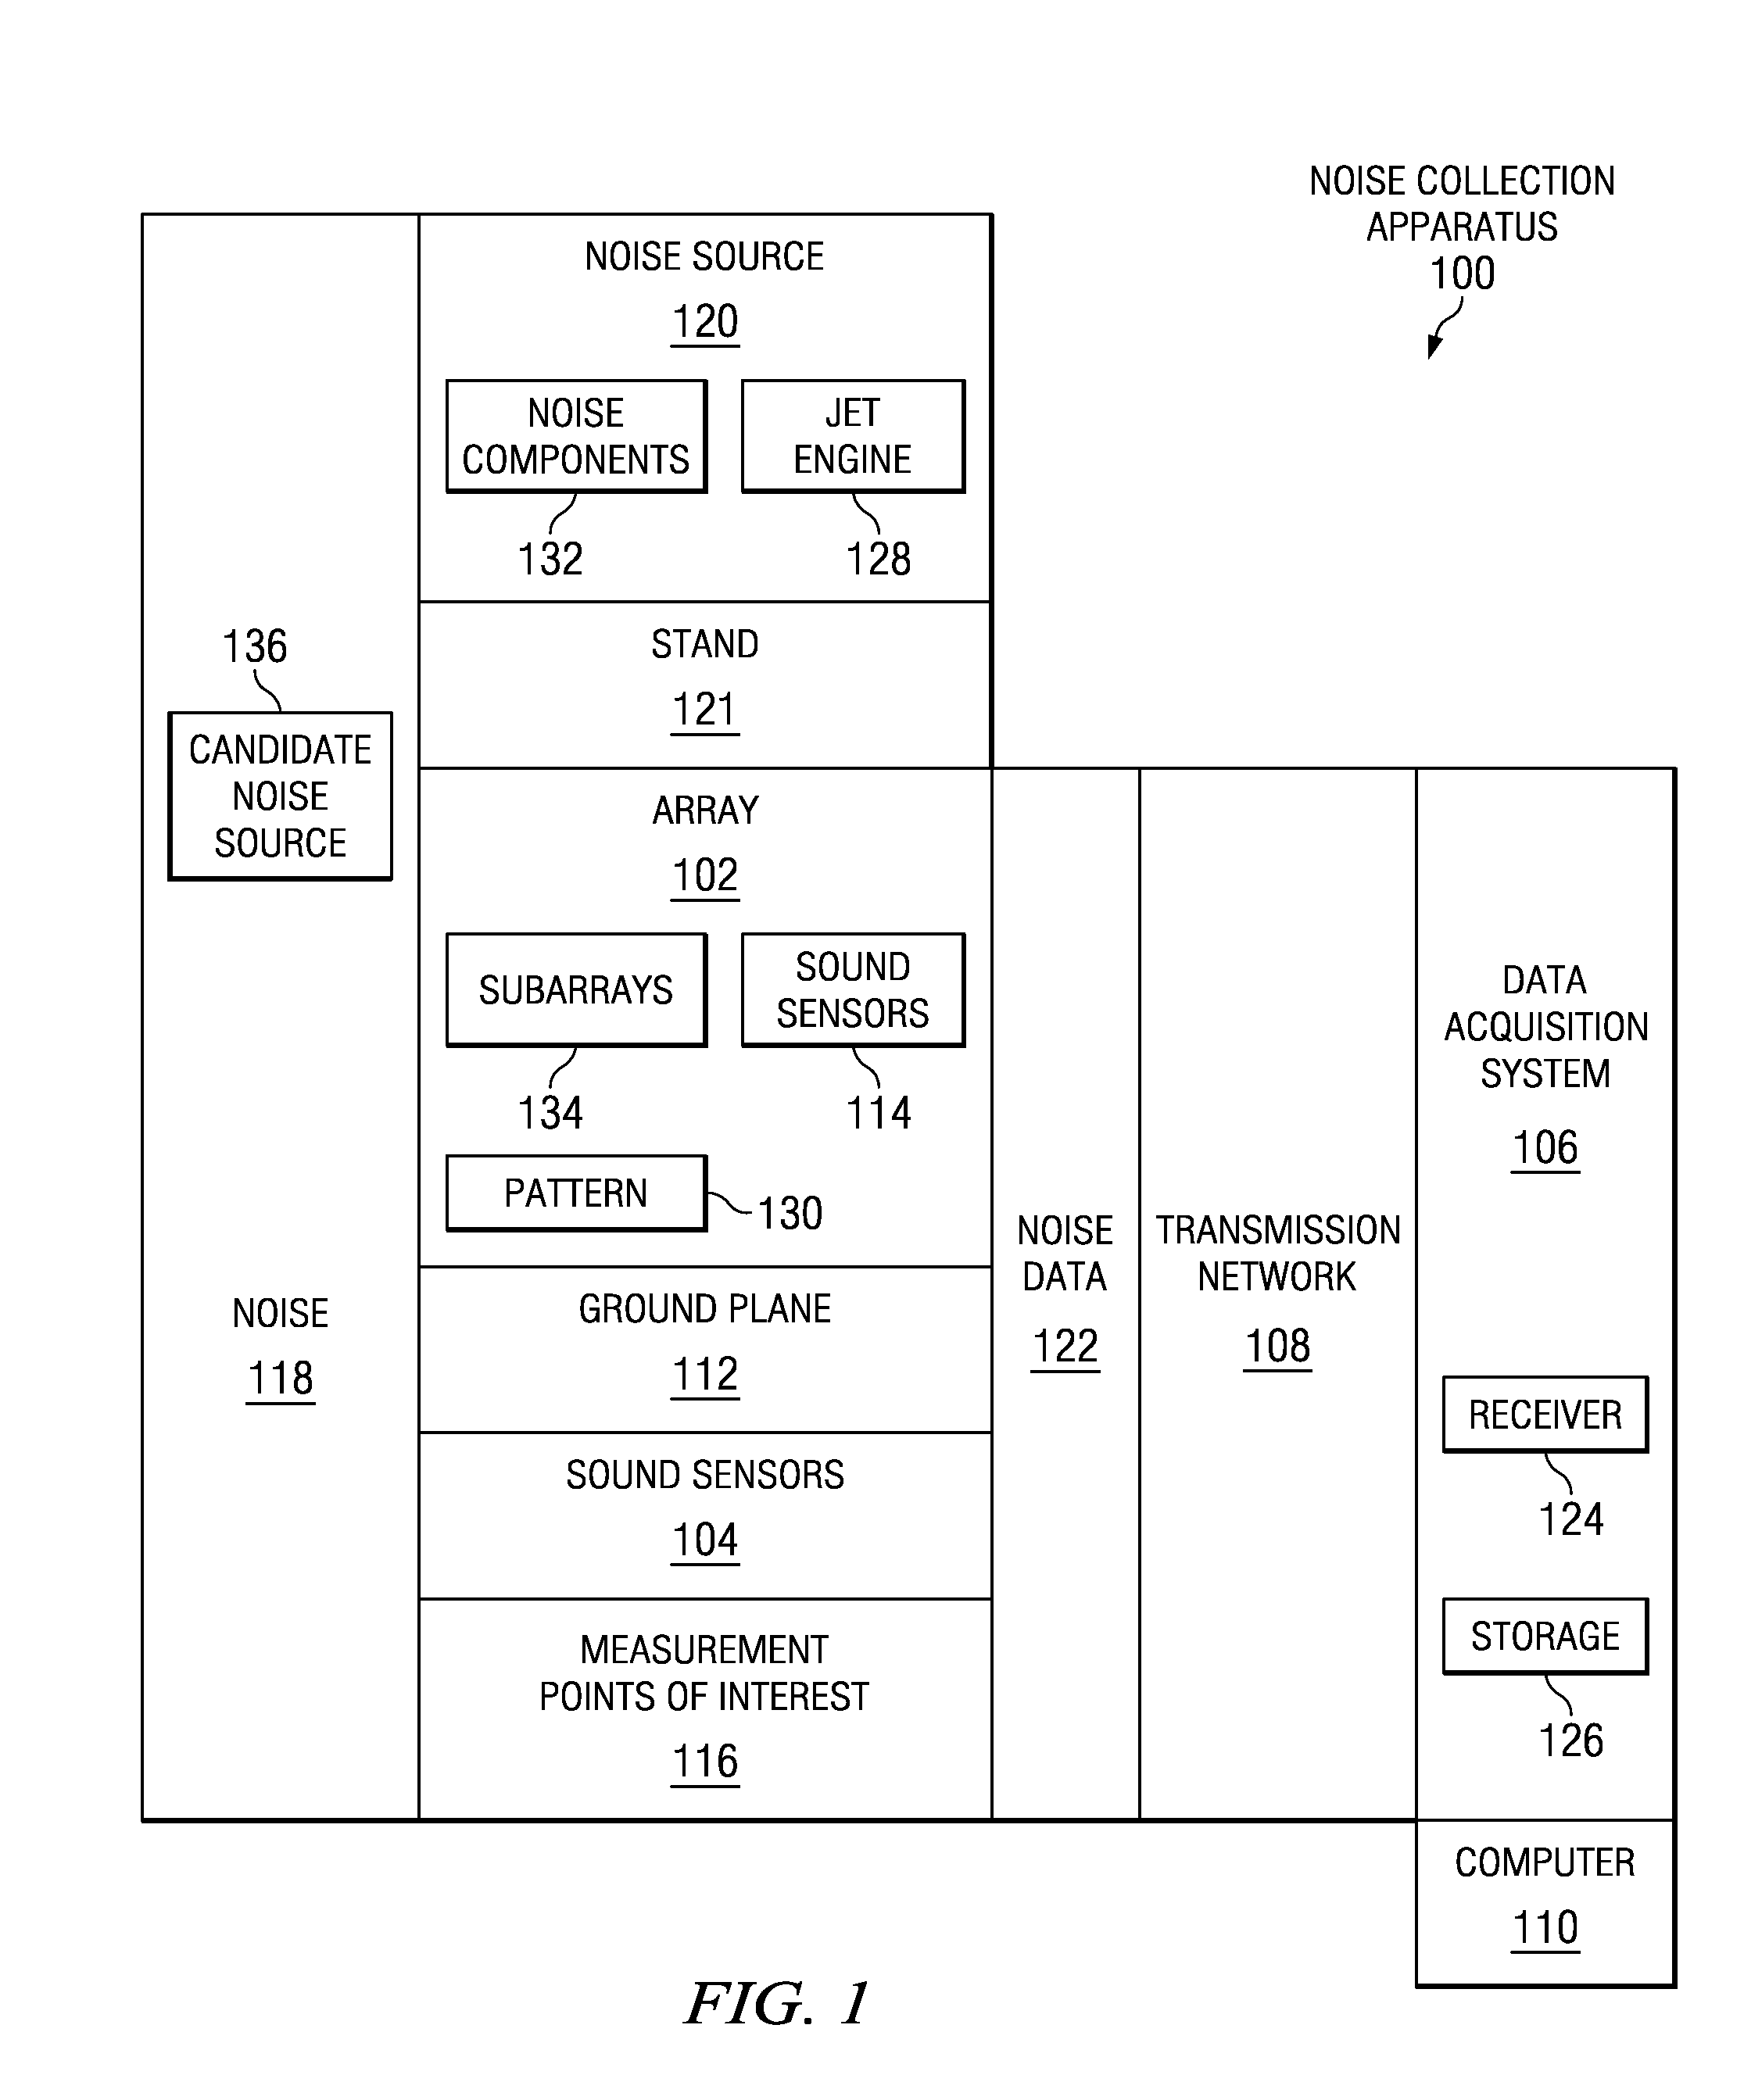 Method and apparatus for identifying noise sources